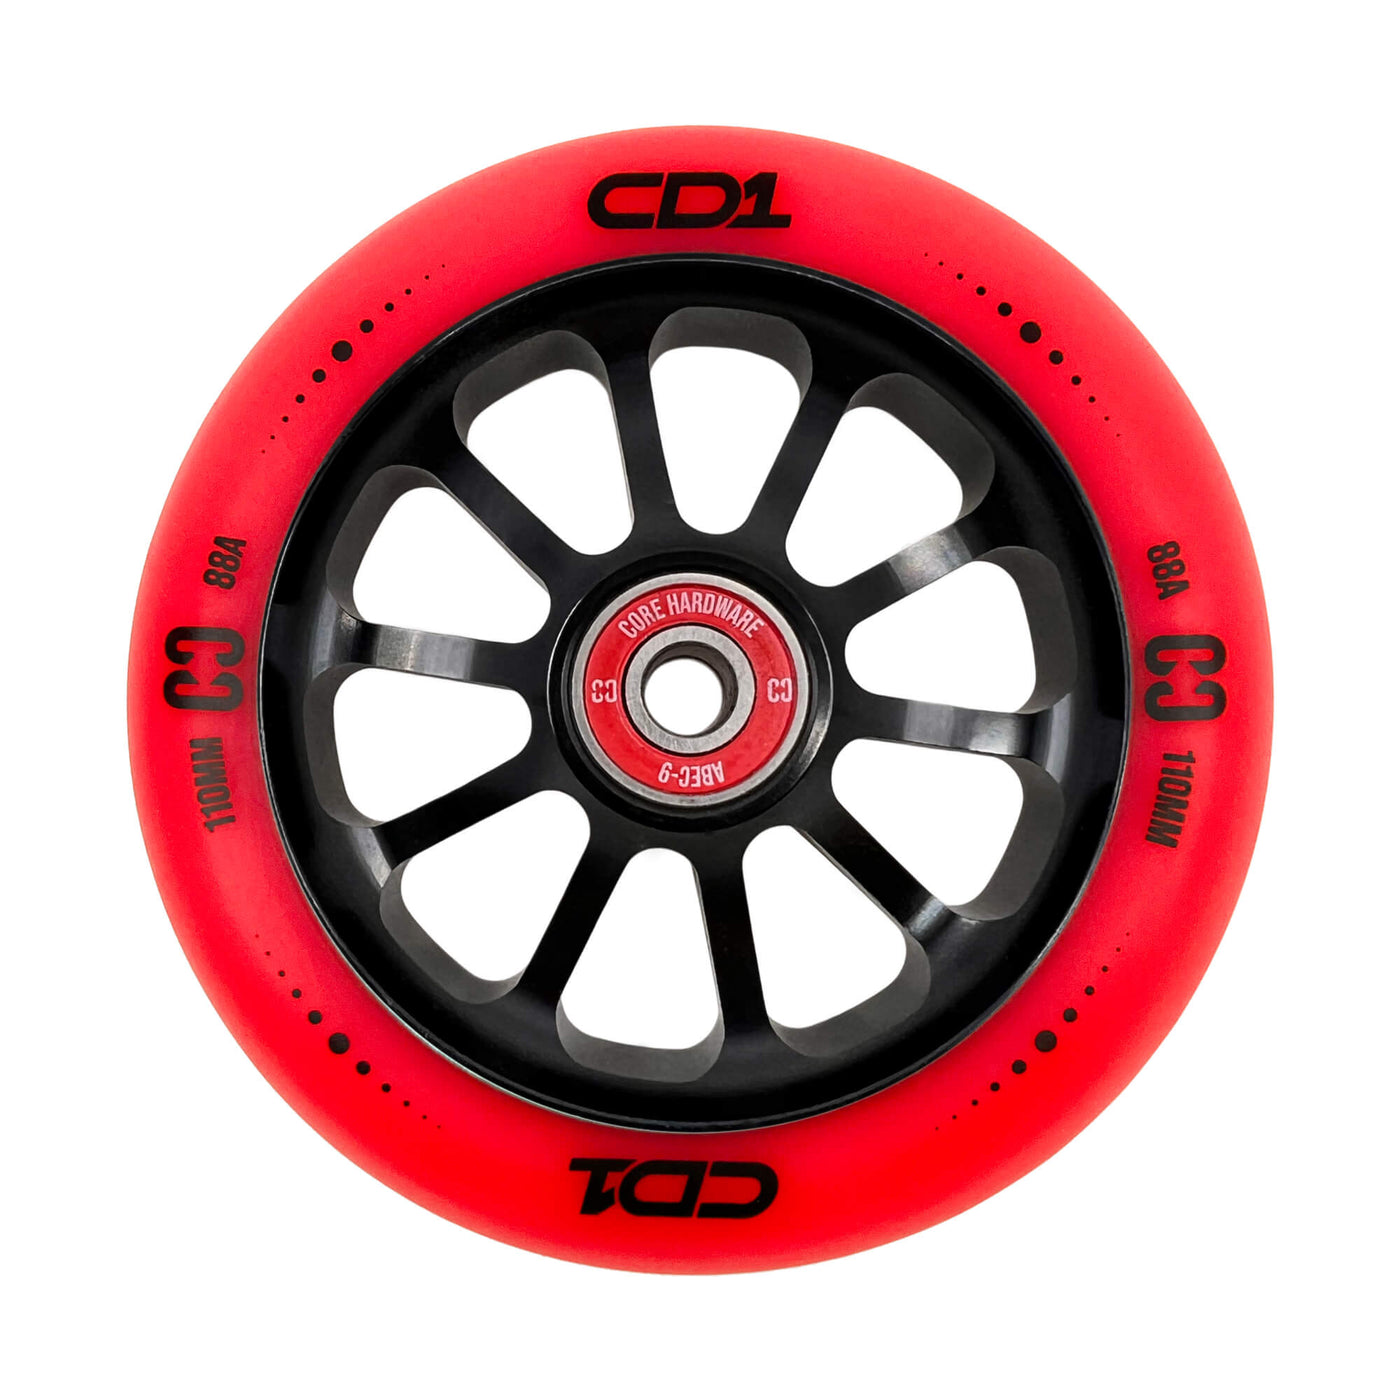 CORE CD1 Spoked Stunt Scooter Wheel 110mm -  Red/Black